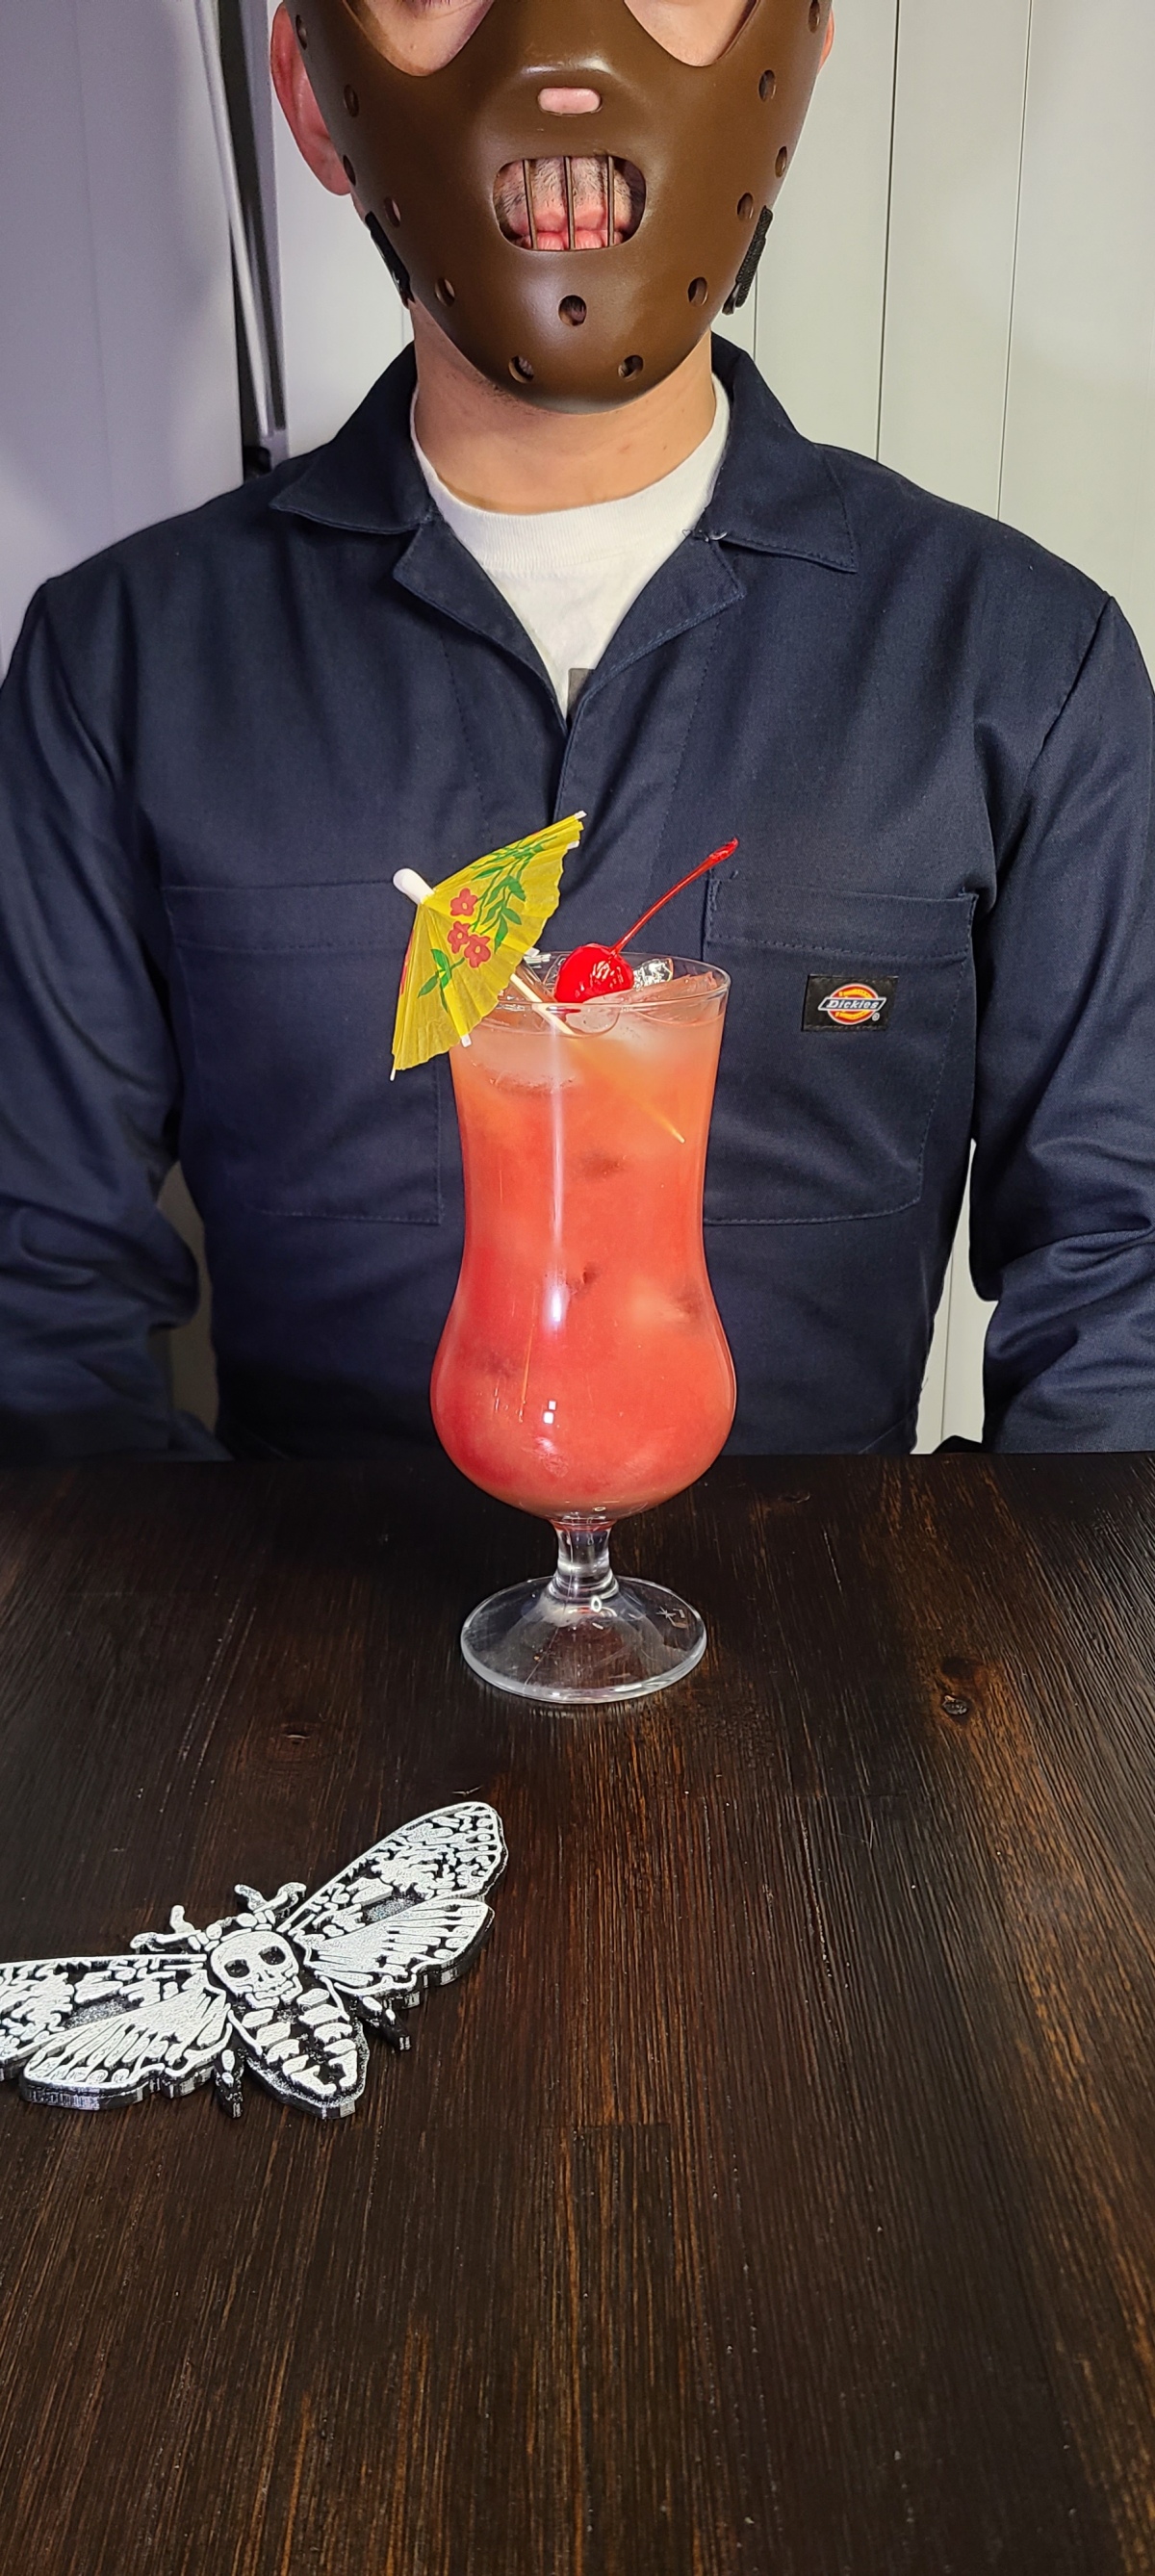 The Hannibal on the Beach drink sits on a dark wood table with a 3D print of the Silence of the Lambs moth. The drink is a reddish pink and is garnished with an umbrella and cherry.